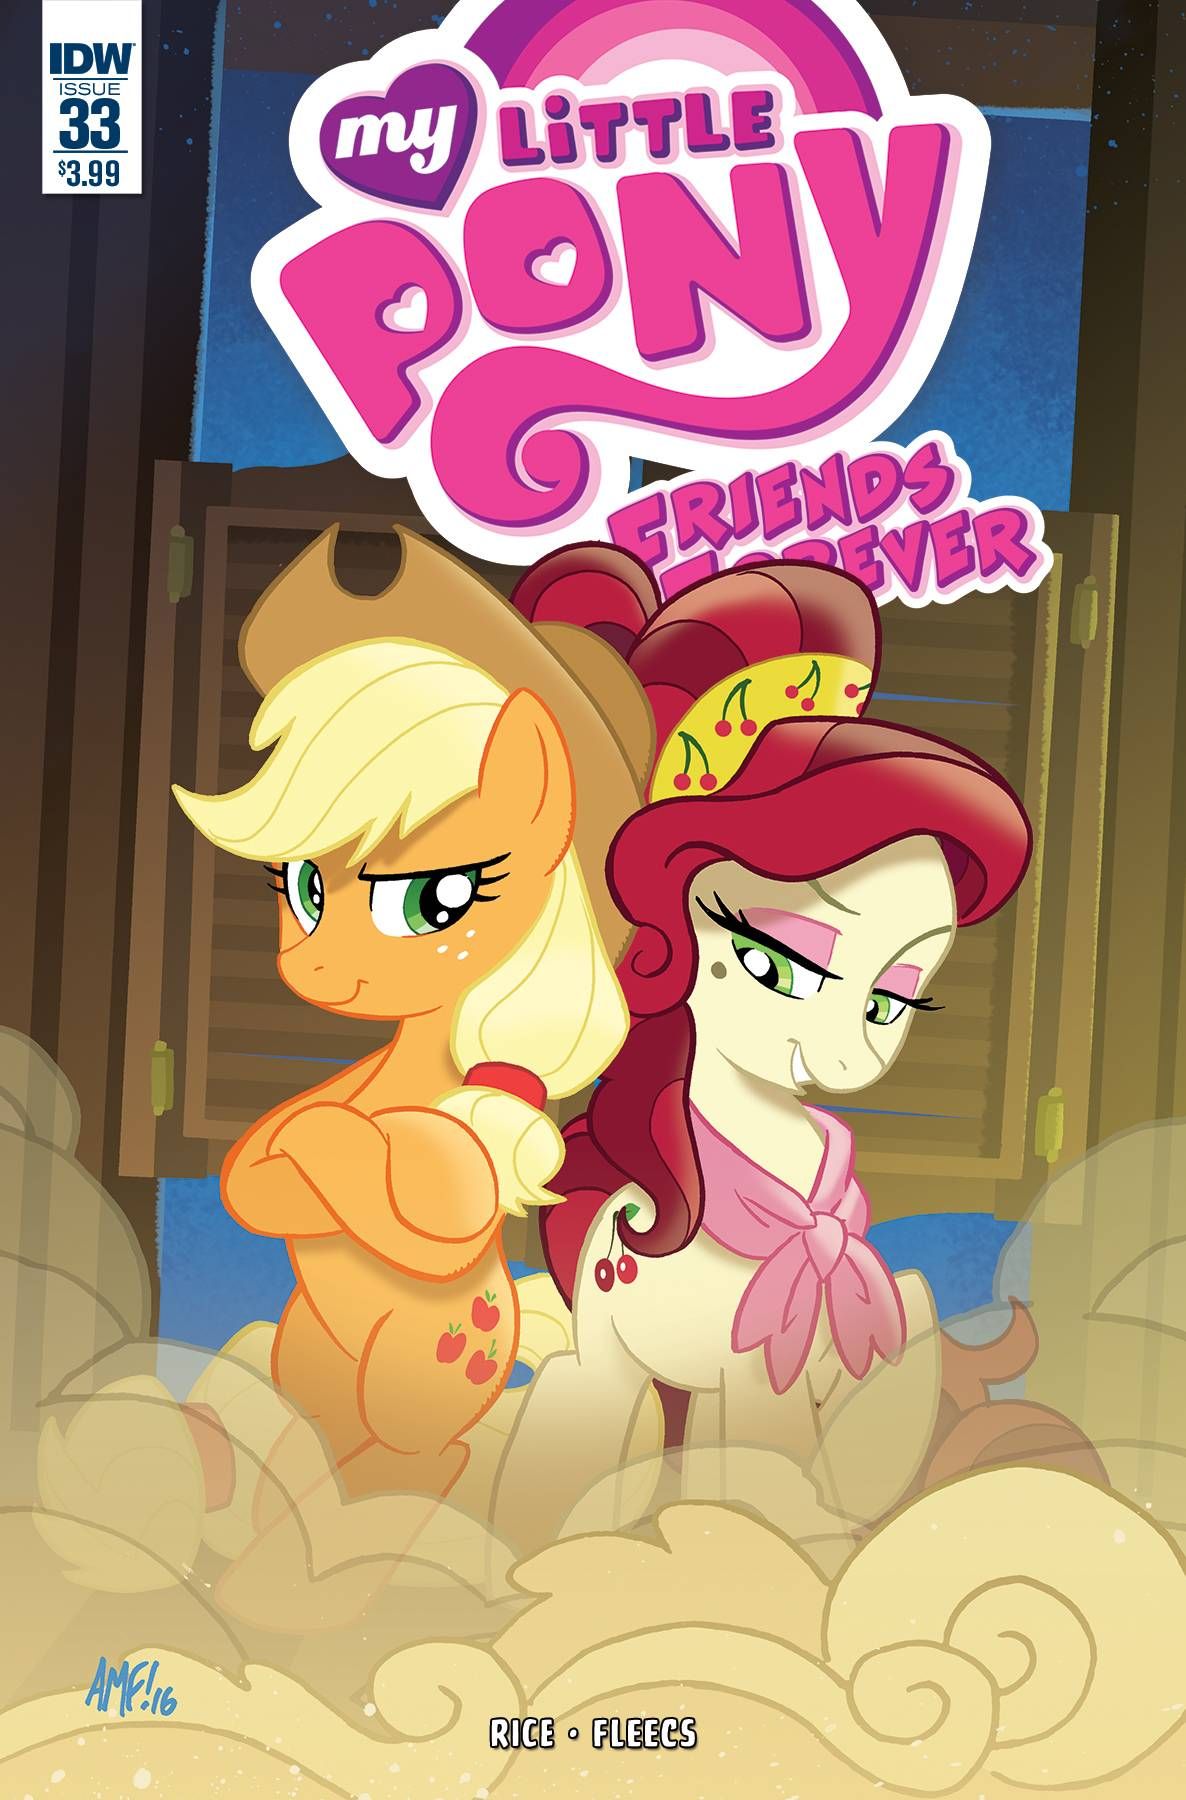 My Little Pony Friends Forever #33 Comic